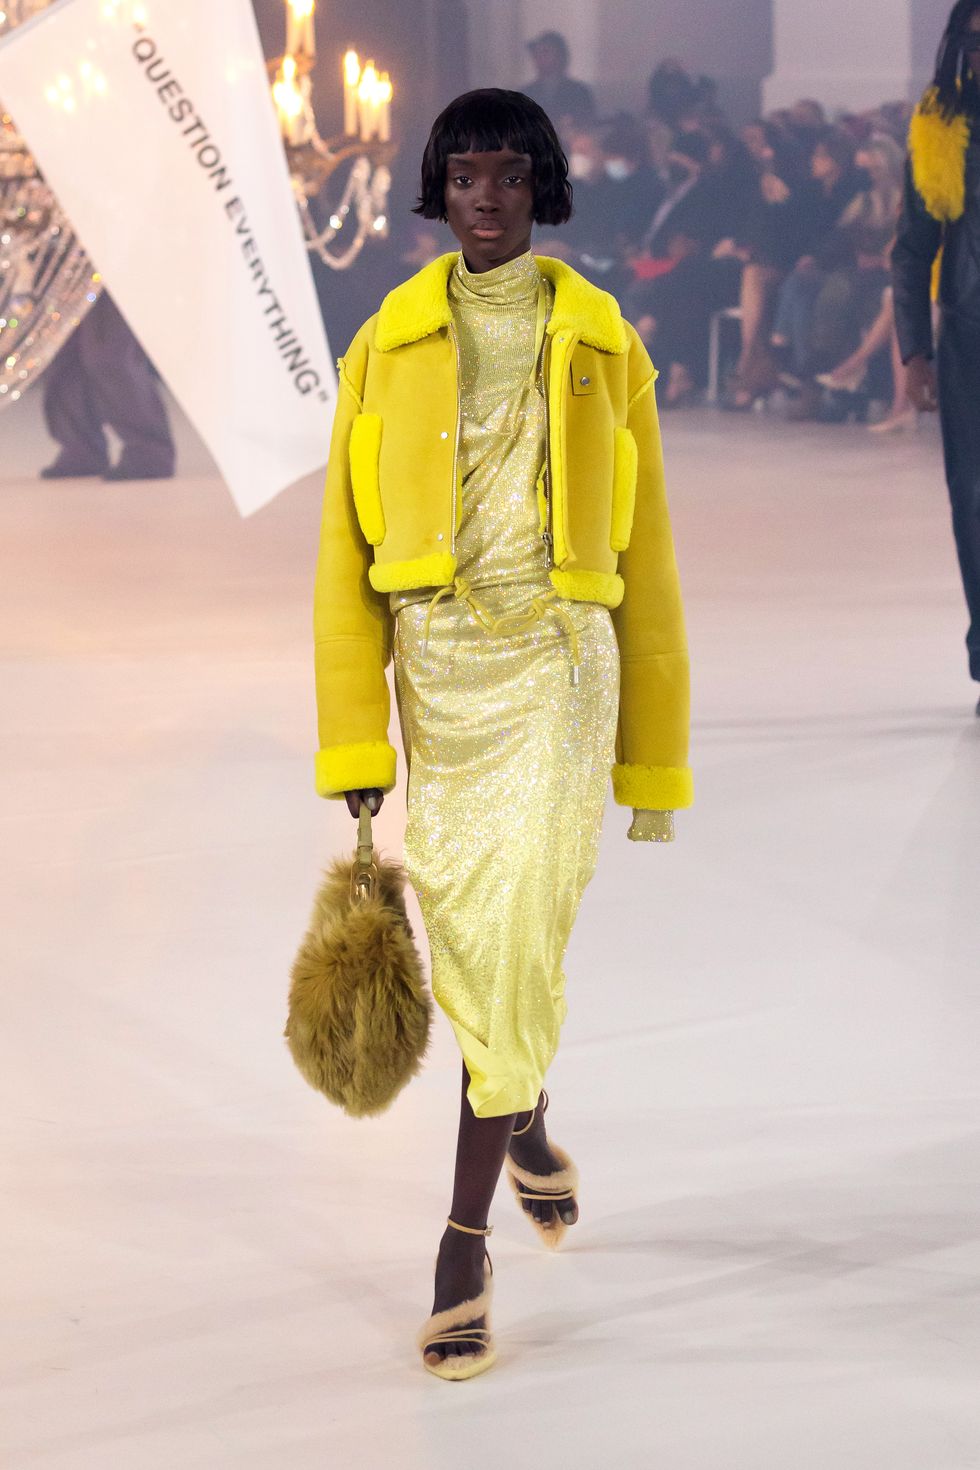 Bags from Louis Vuitton FW 2022 runway show (Fall/Winter) with